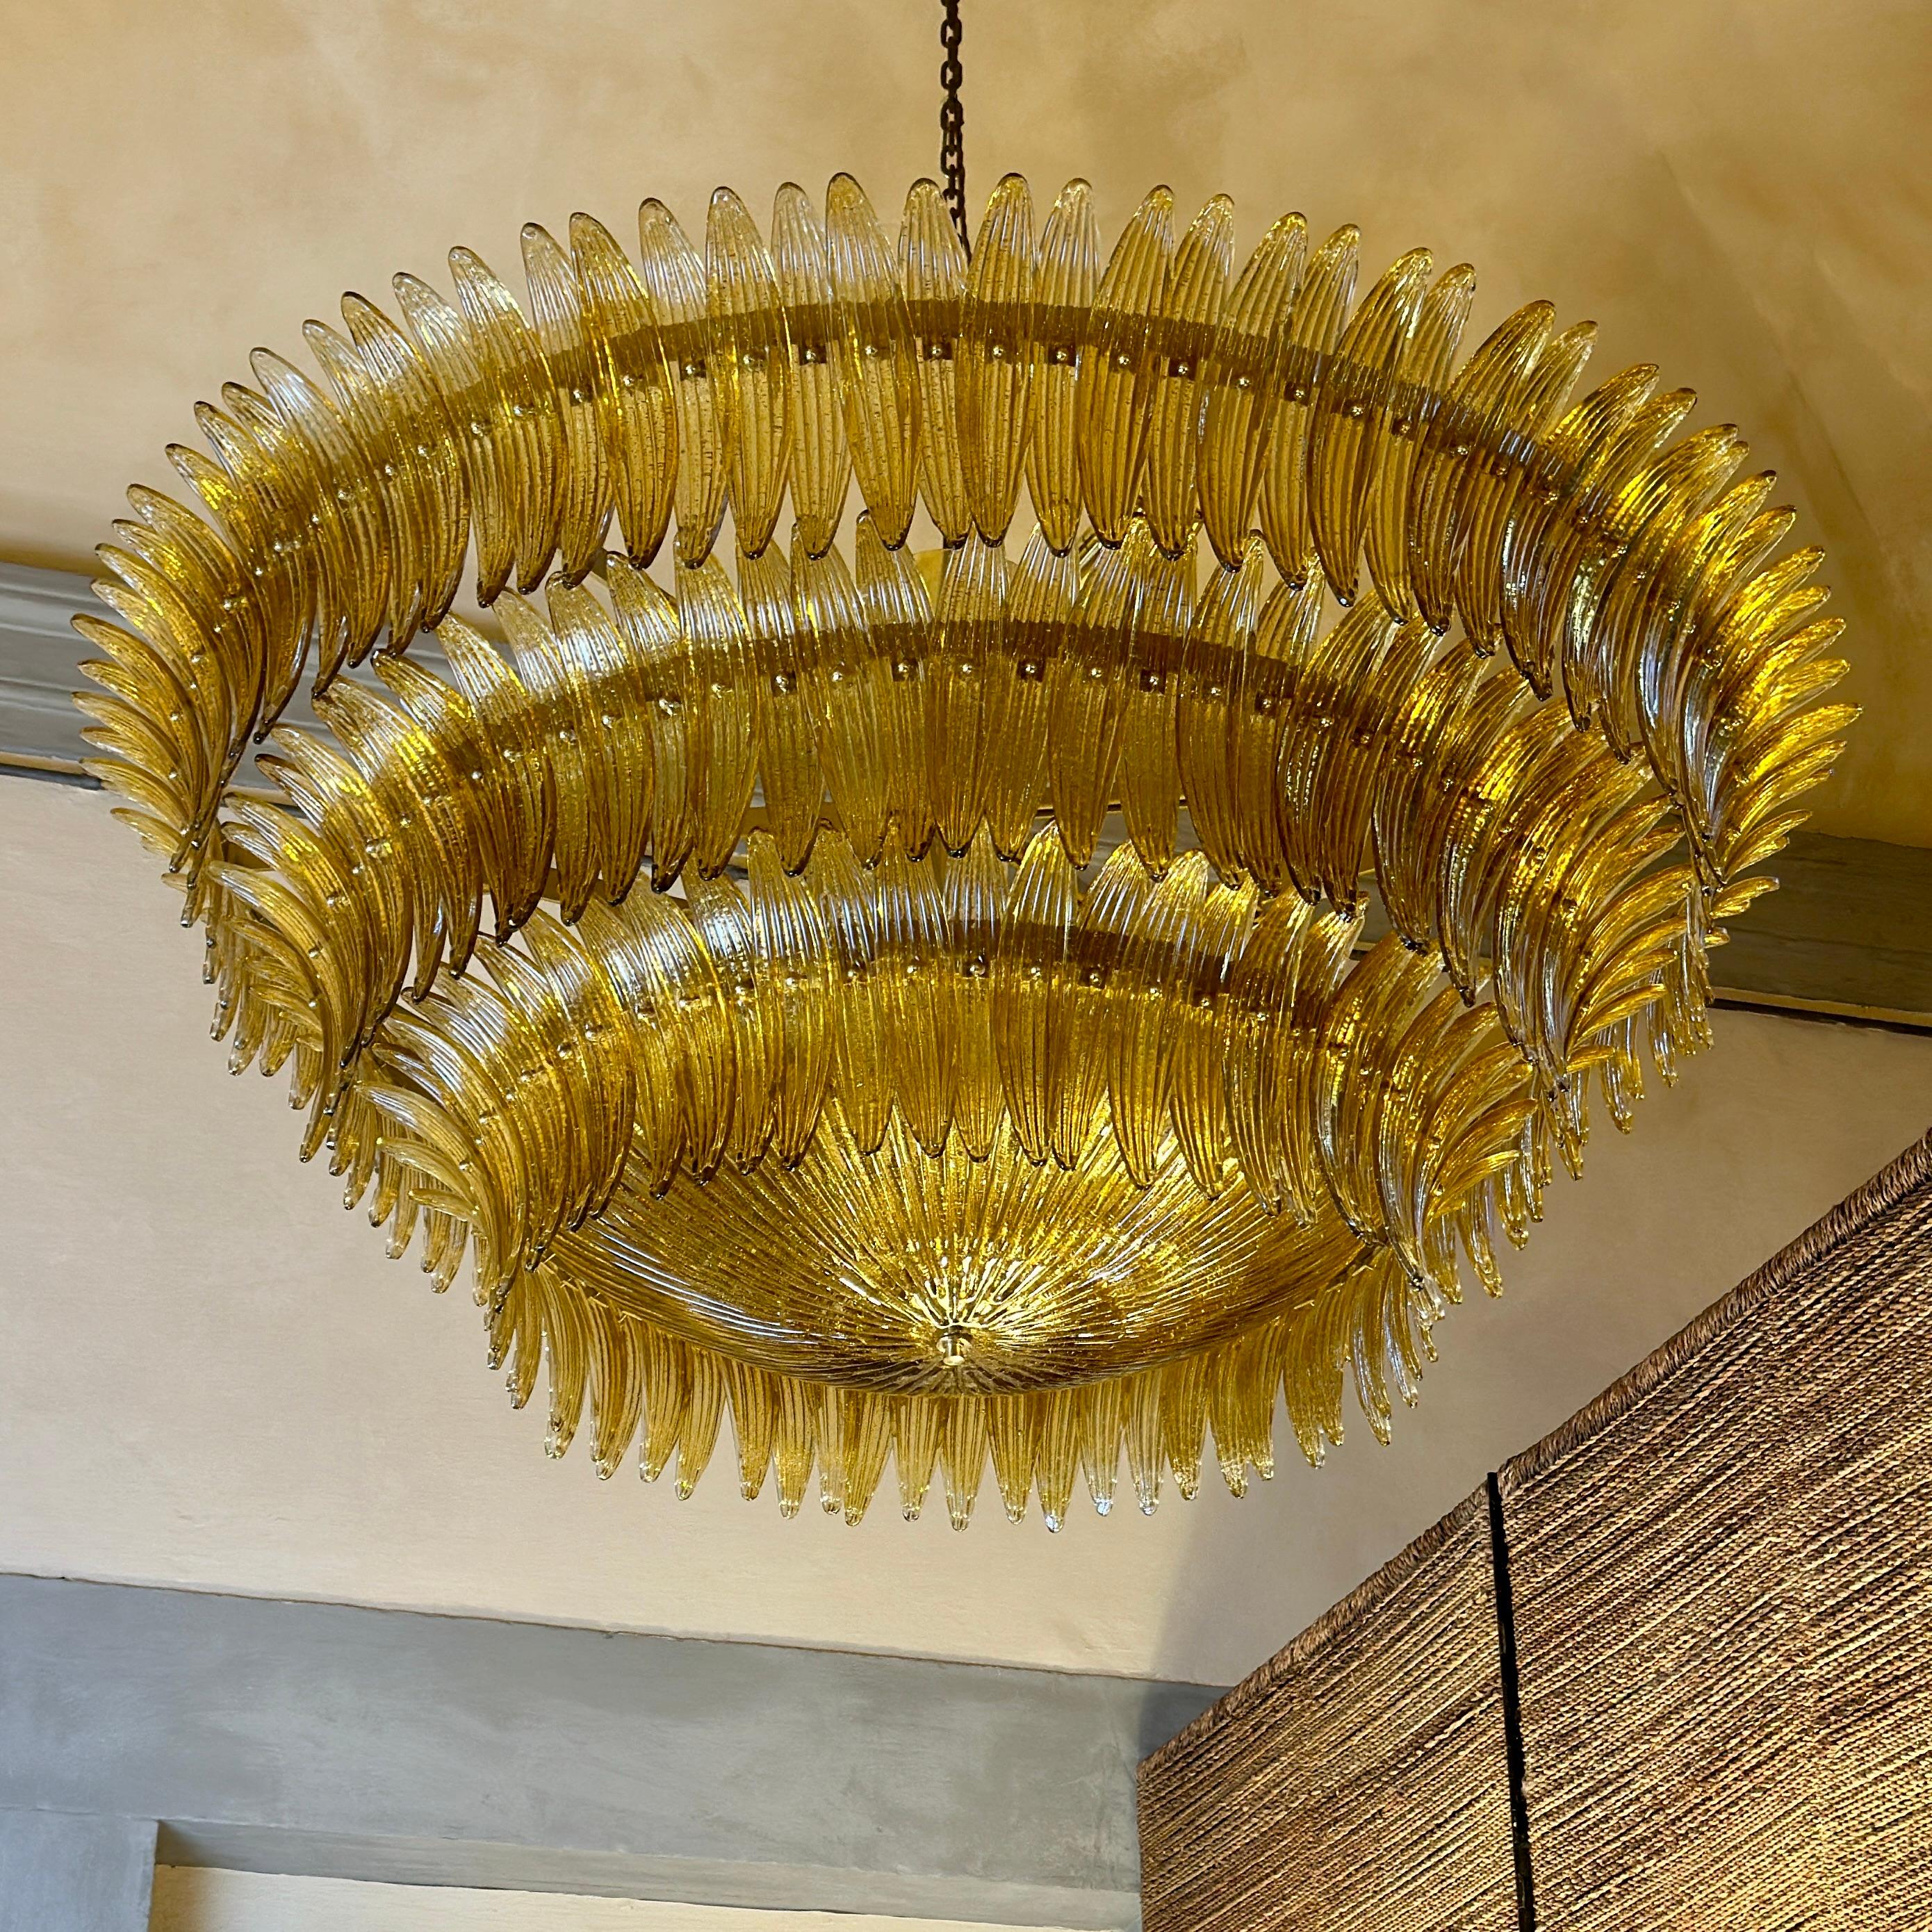 Monumental amber palmette glass with gold glittering and bottom round ribbed glass to close the round chandelier by Barovier & Toso. 
White painted iron structure with brass finishings and 36 E14 Light Bulbs with warm light recommended. Eventual